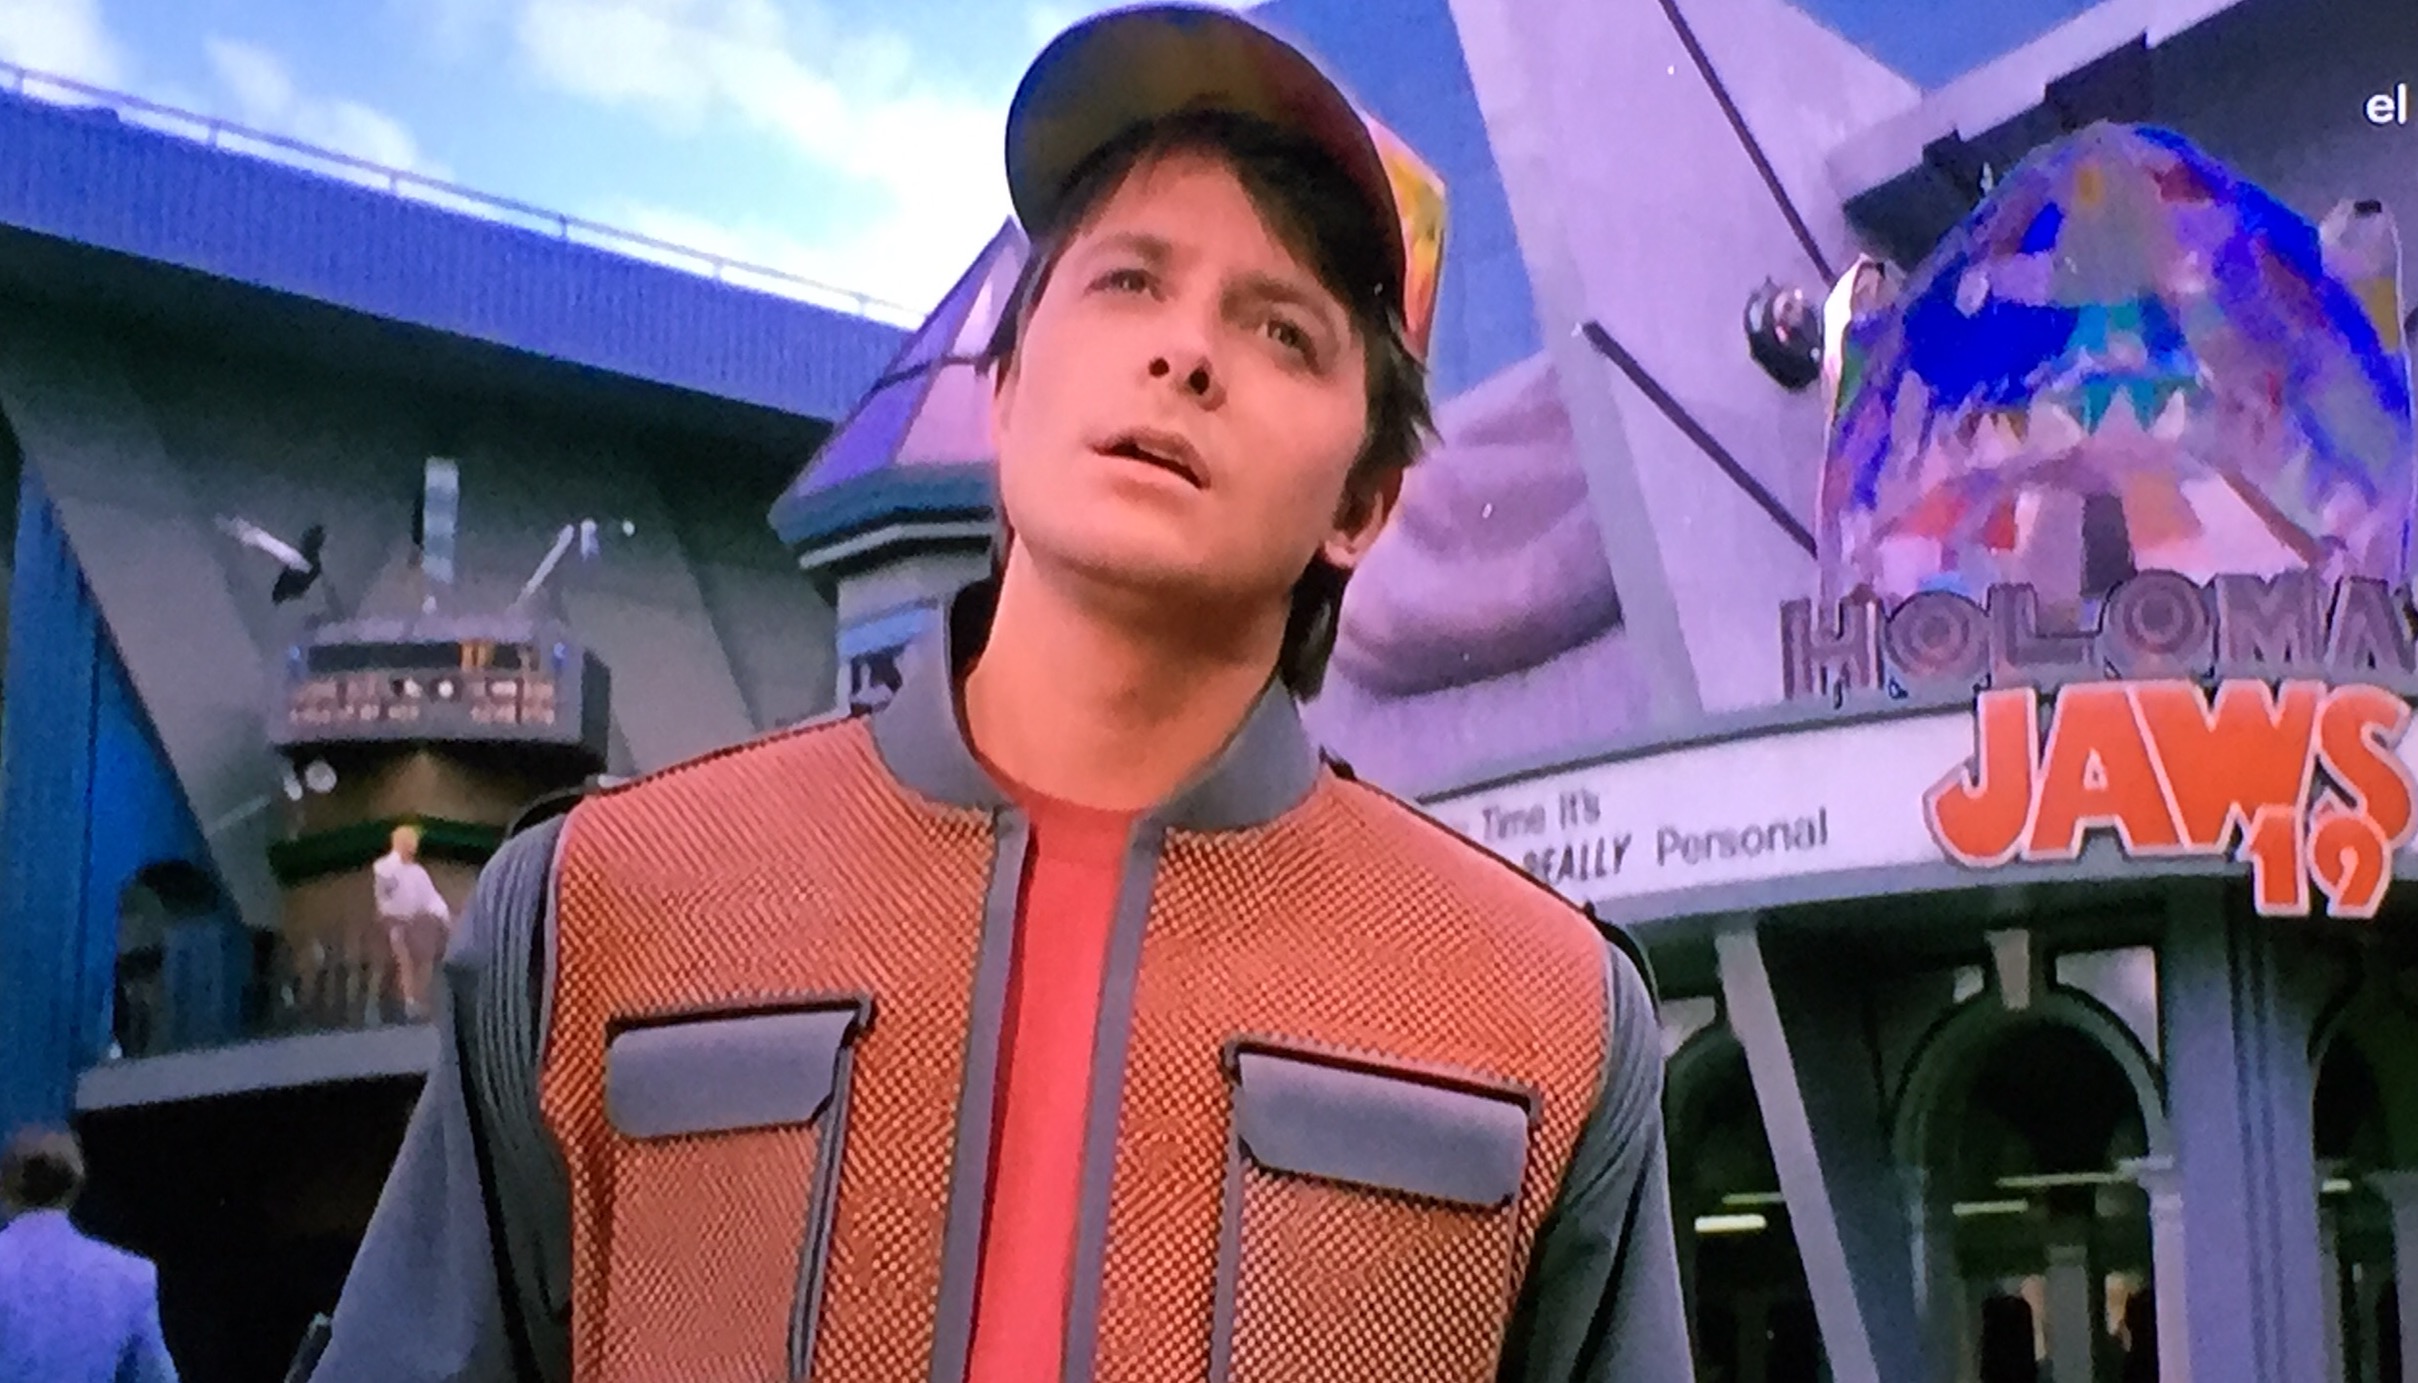 back to the future 2 marty mcfly 2015 efl free video worksheet